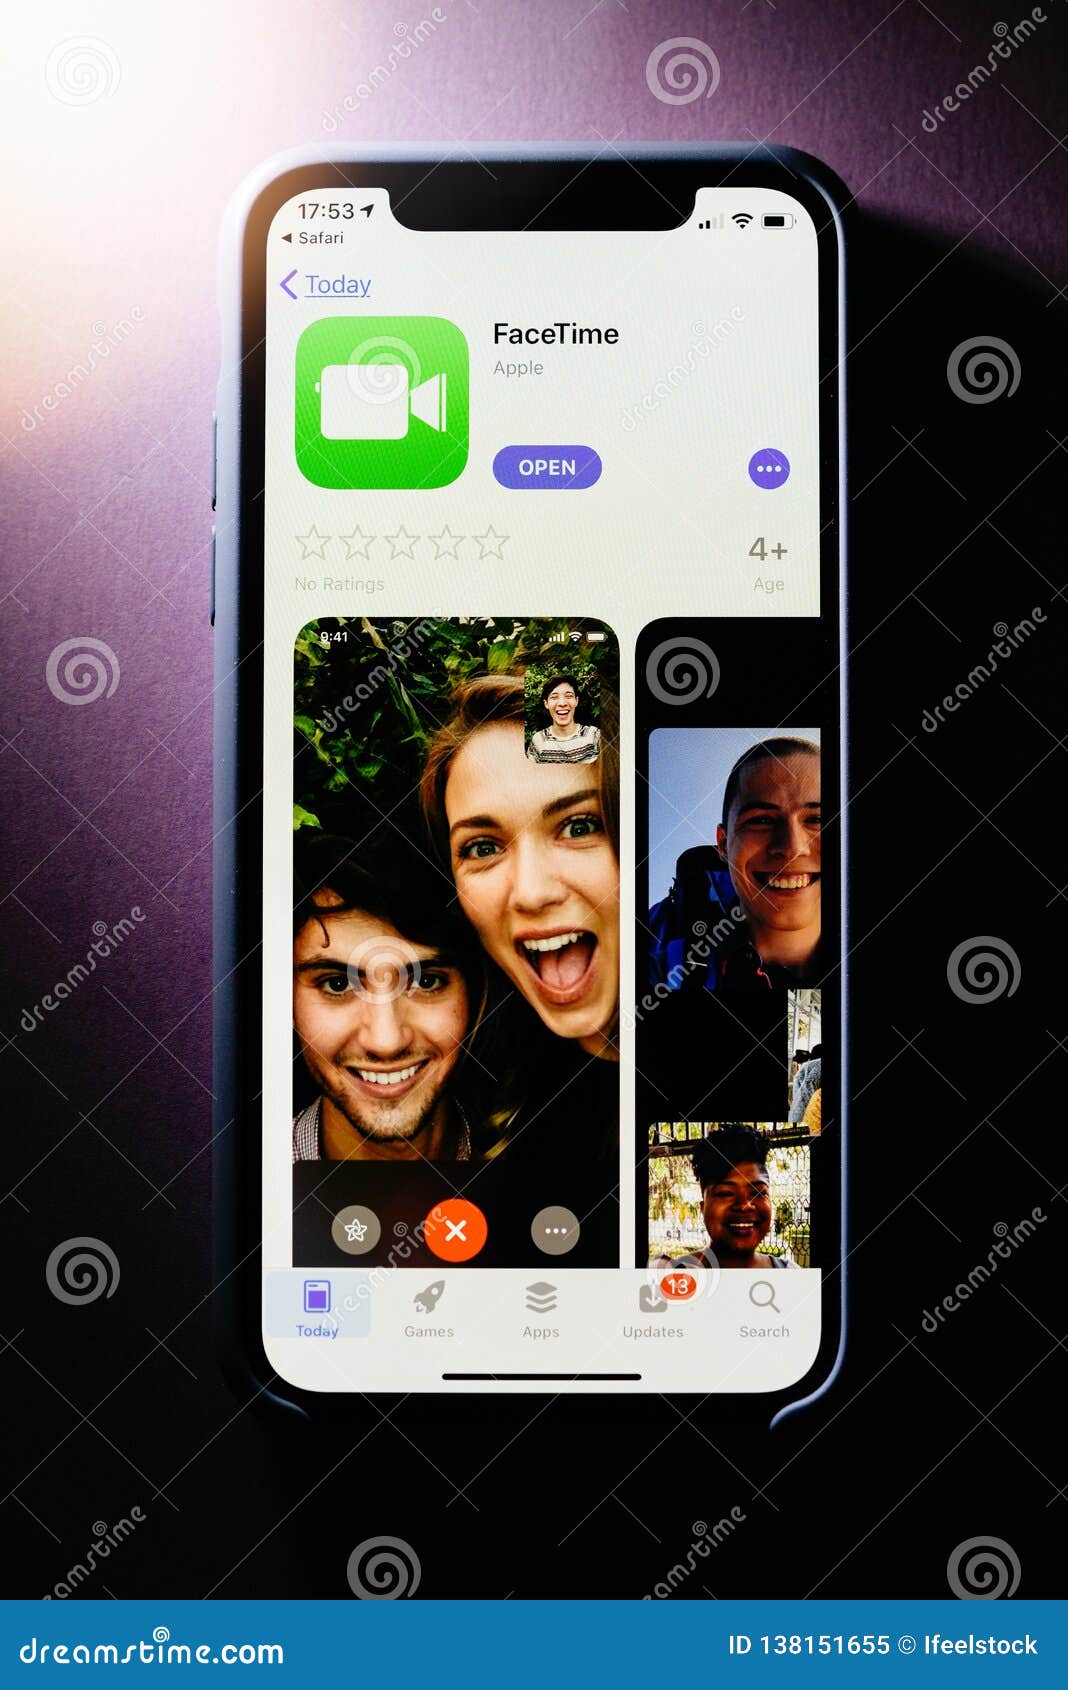 Apple IPhone XS With FaceTime App Editorial Image - Image ...